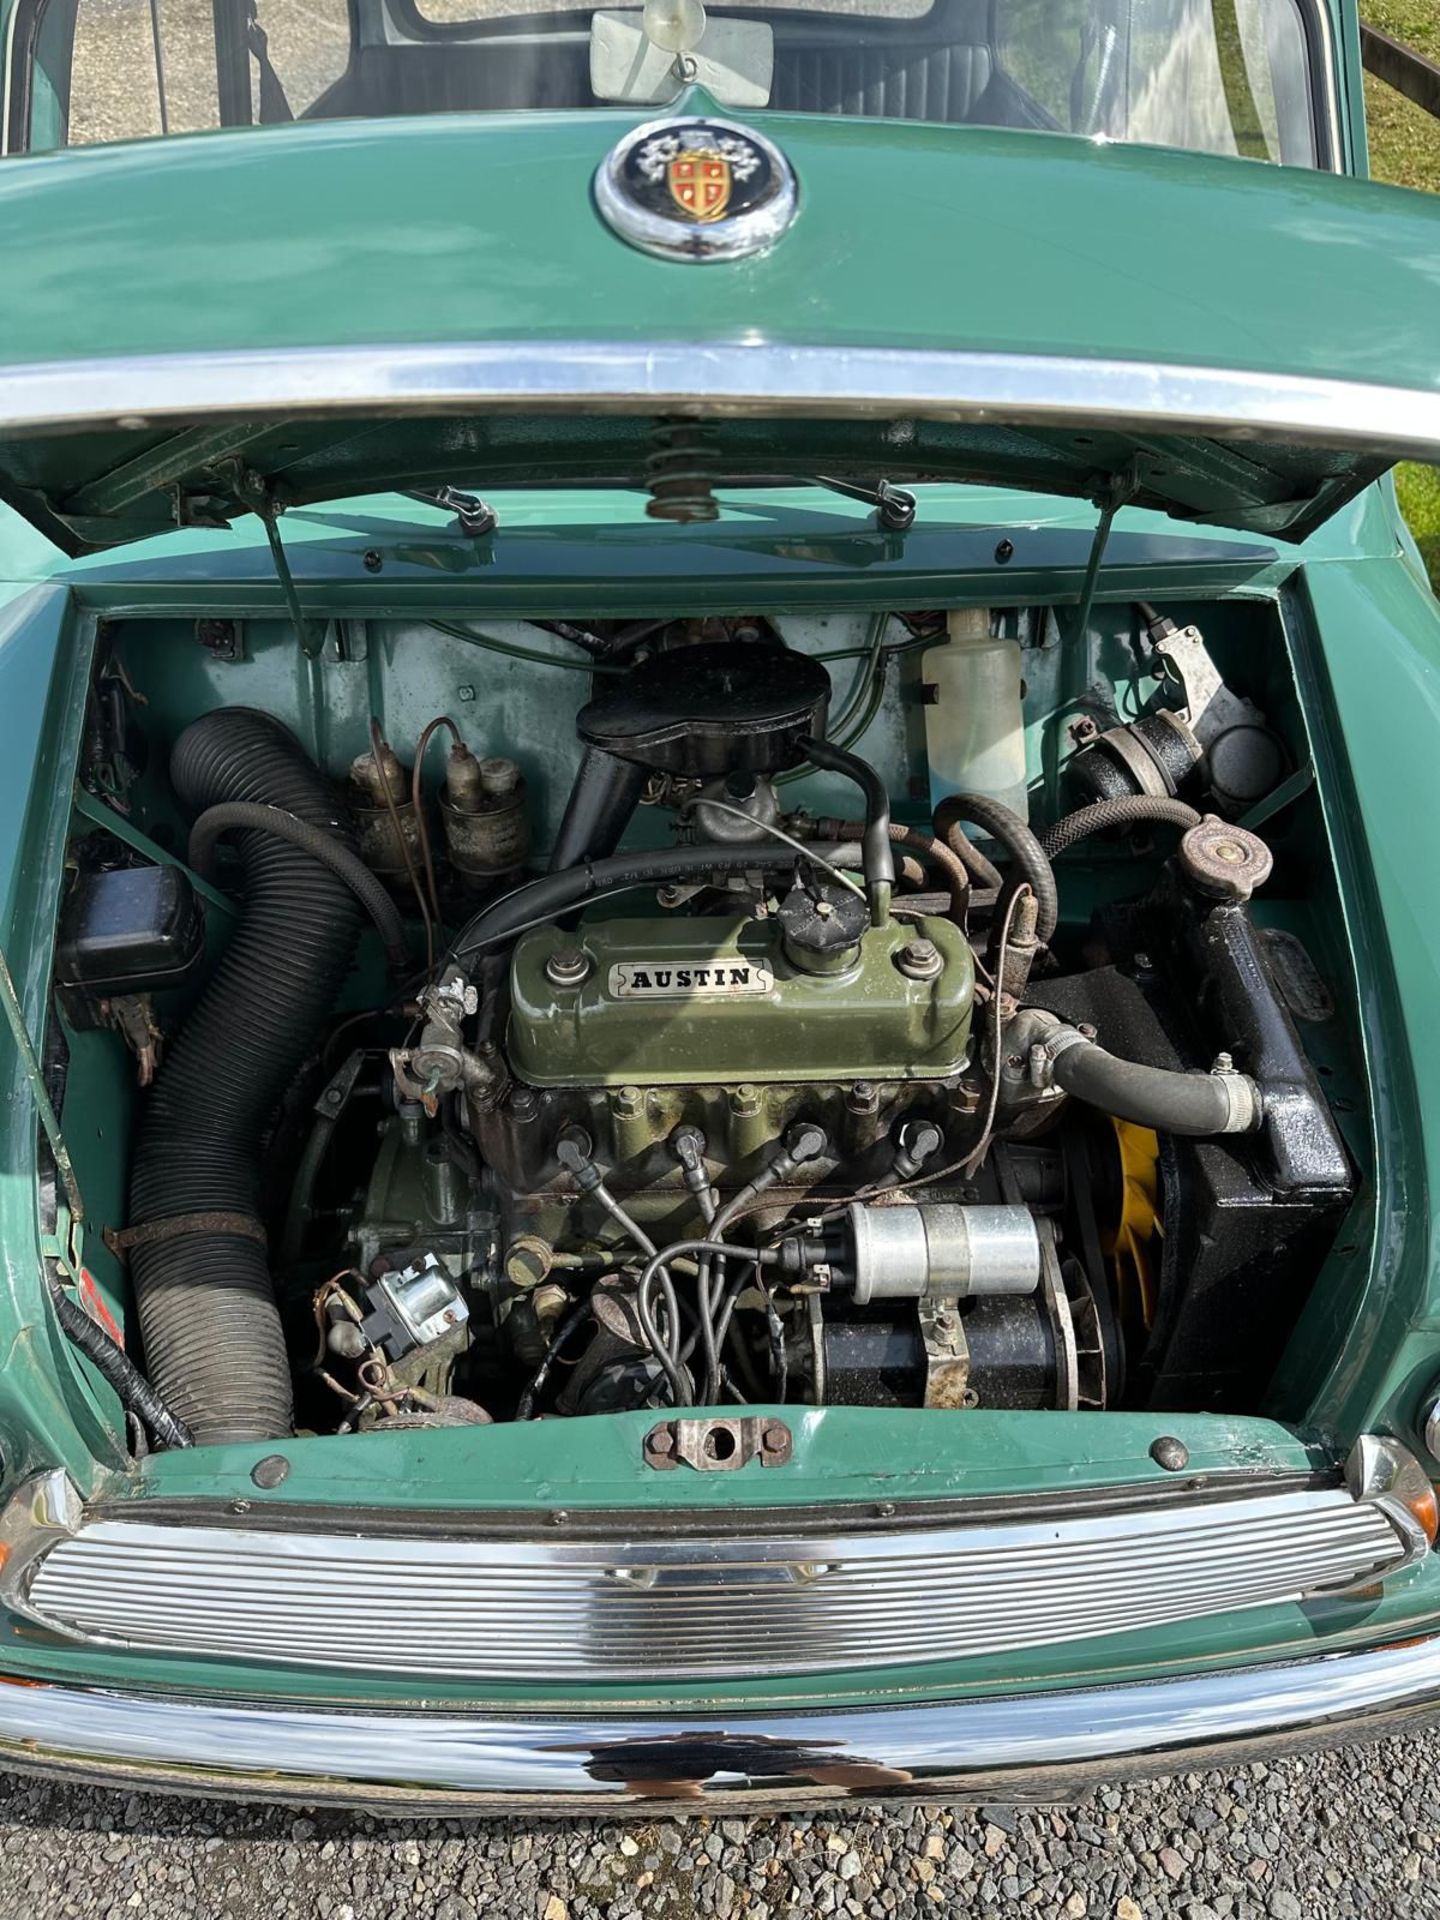 1968 Mini 860 - just 17,000 miles from new! - Image 22 of 27